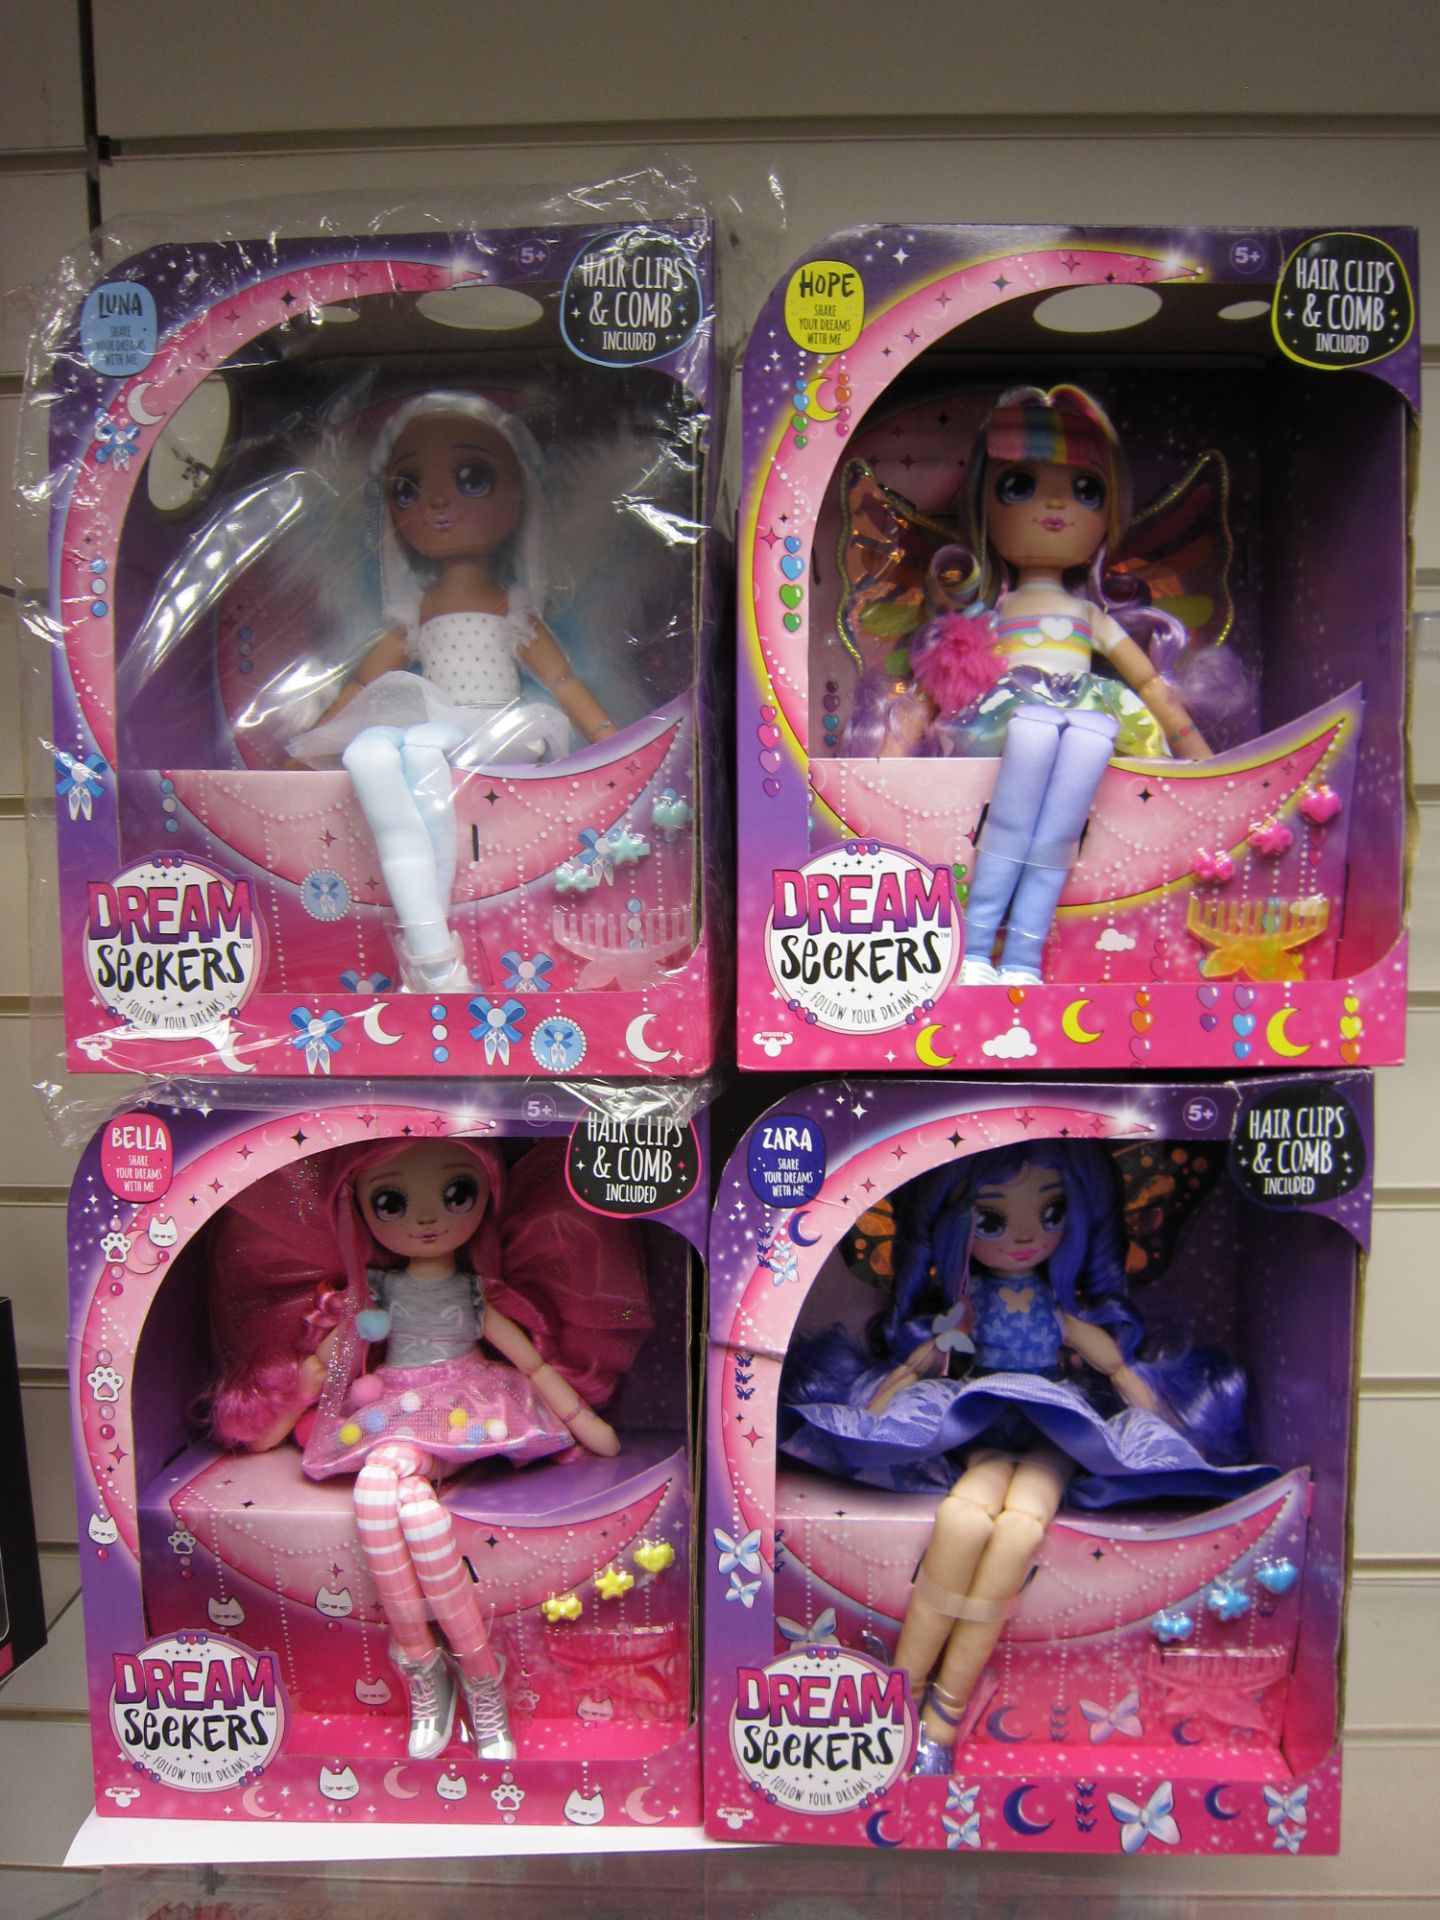 1 Pcs Assorted Brand New Dream Seekers Dolls With Accessories Sealed Boxes Super Premium Quality